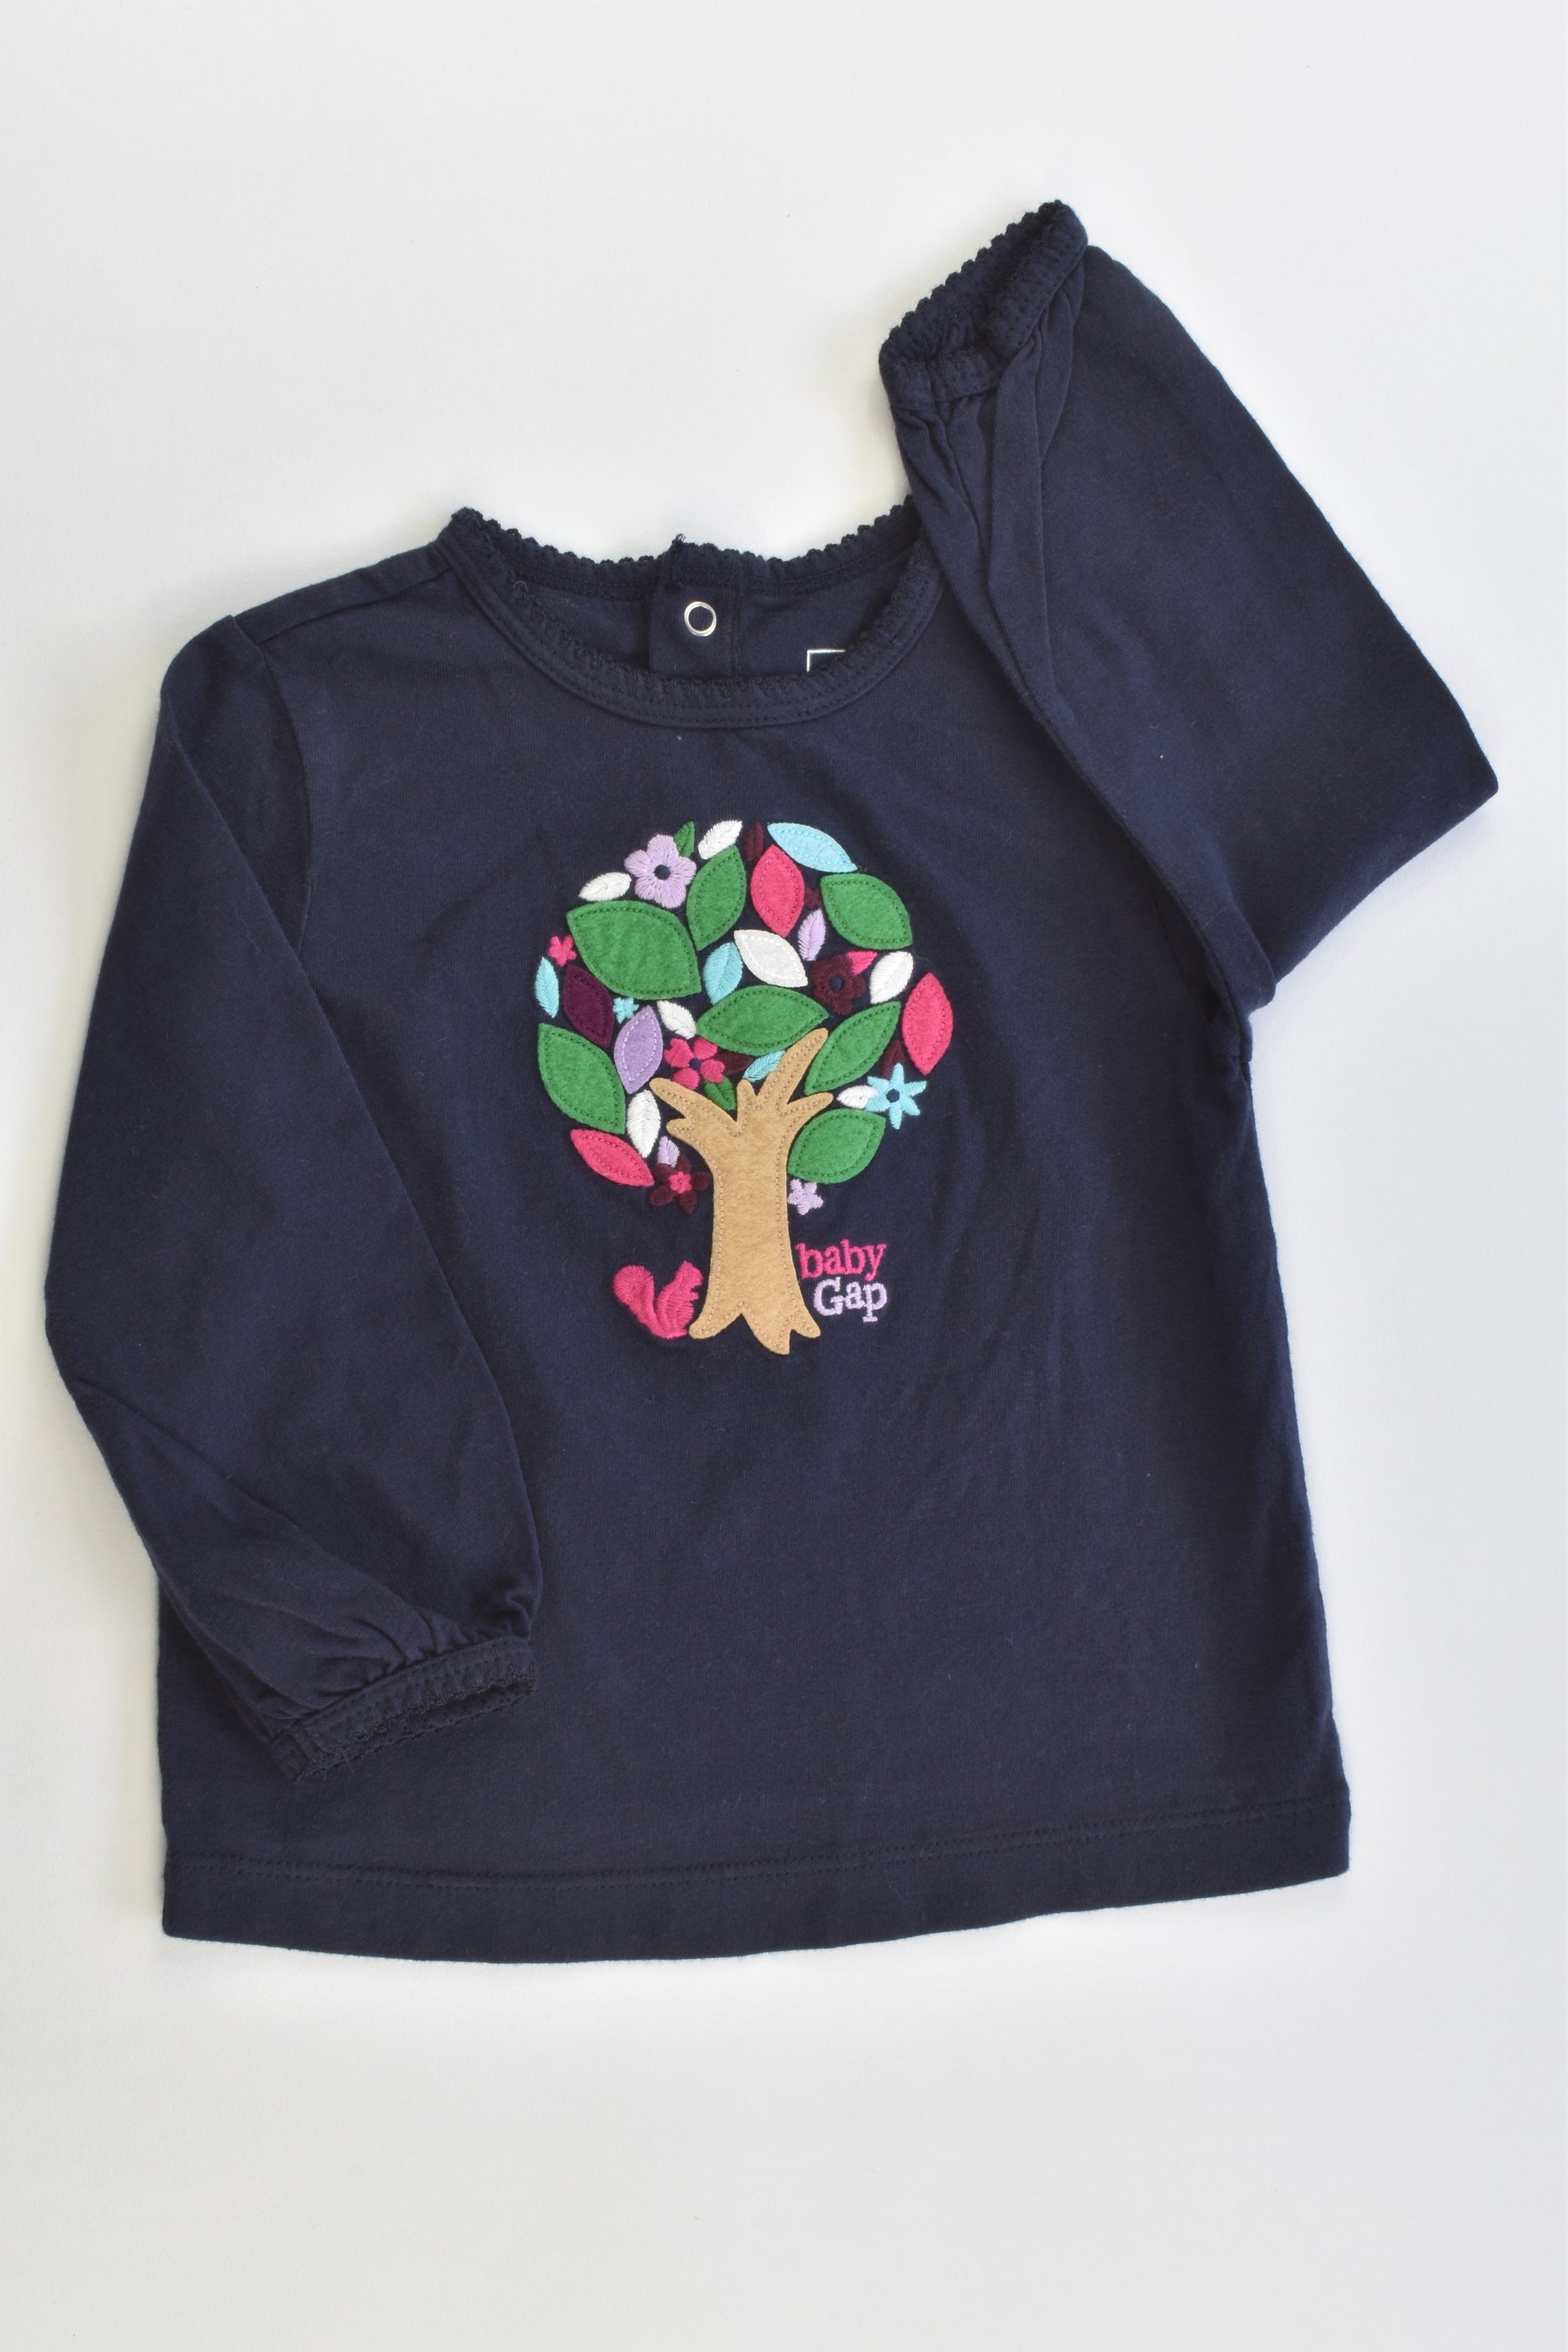 Baby Gap Size 1 (12-18 months) Tree Top